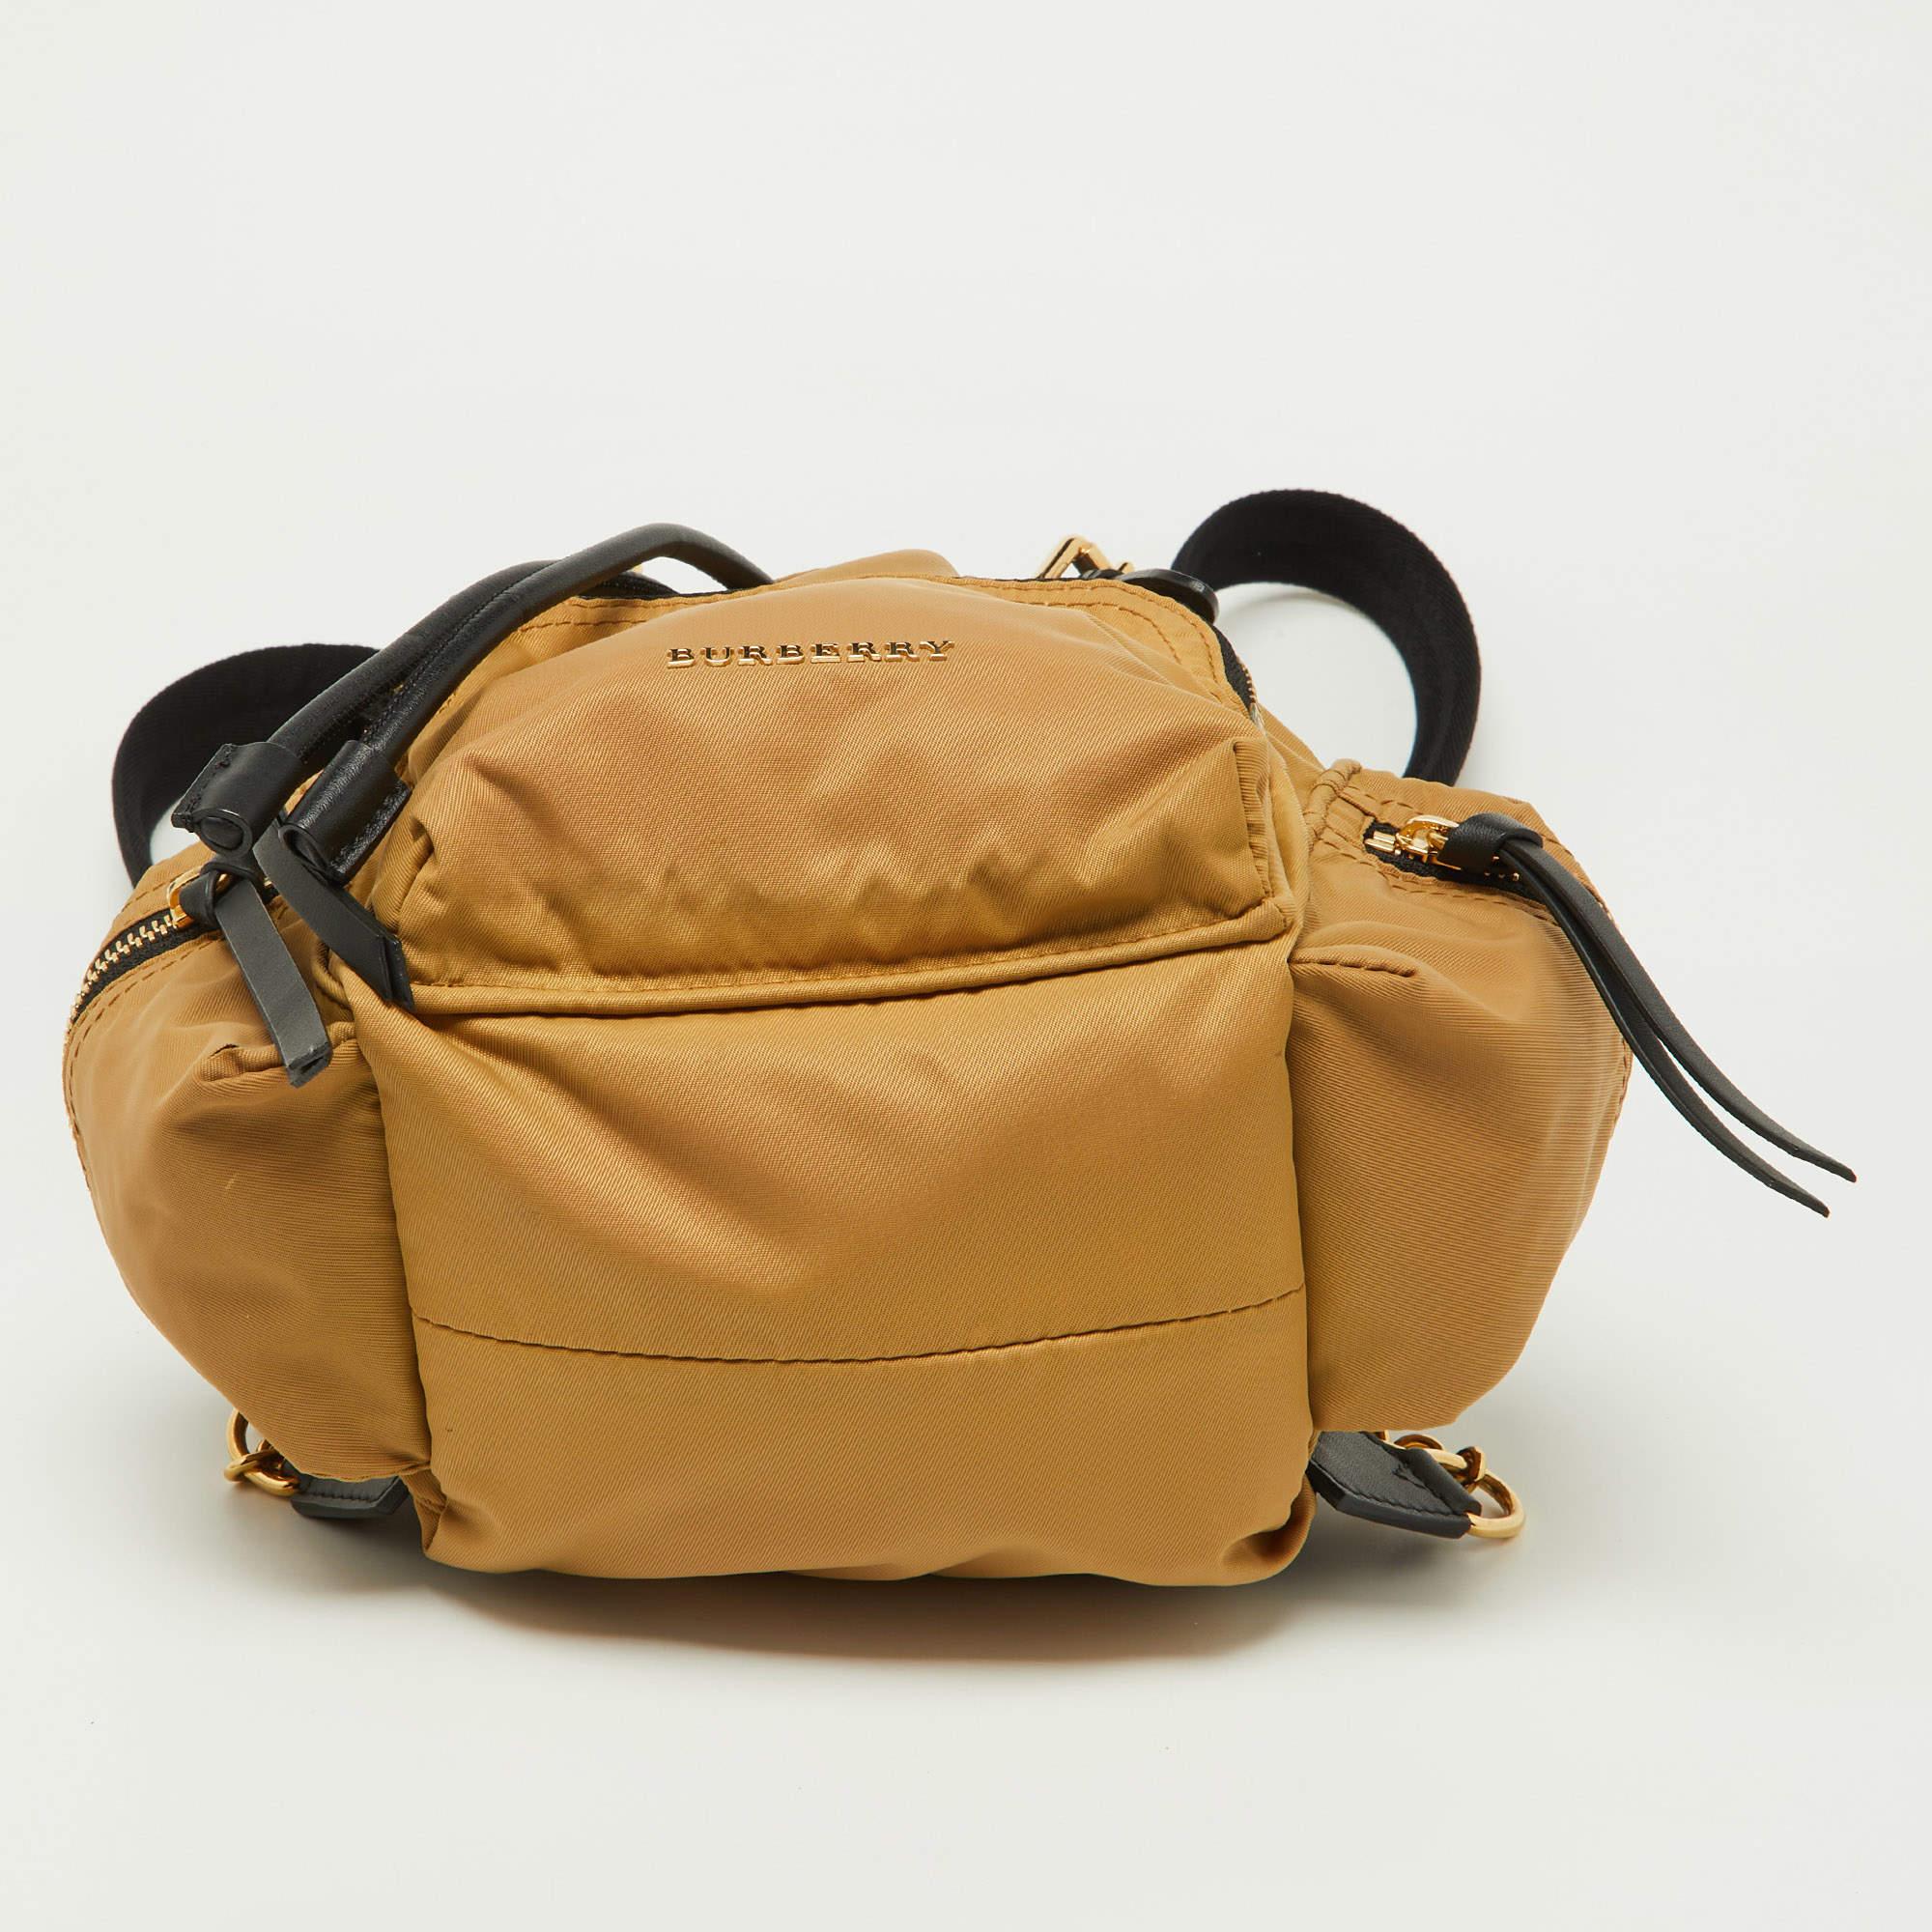 Burberry Beige/Black Nylon and Leather Small Rucksack Backpack 1